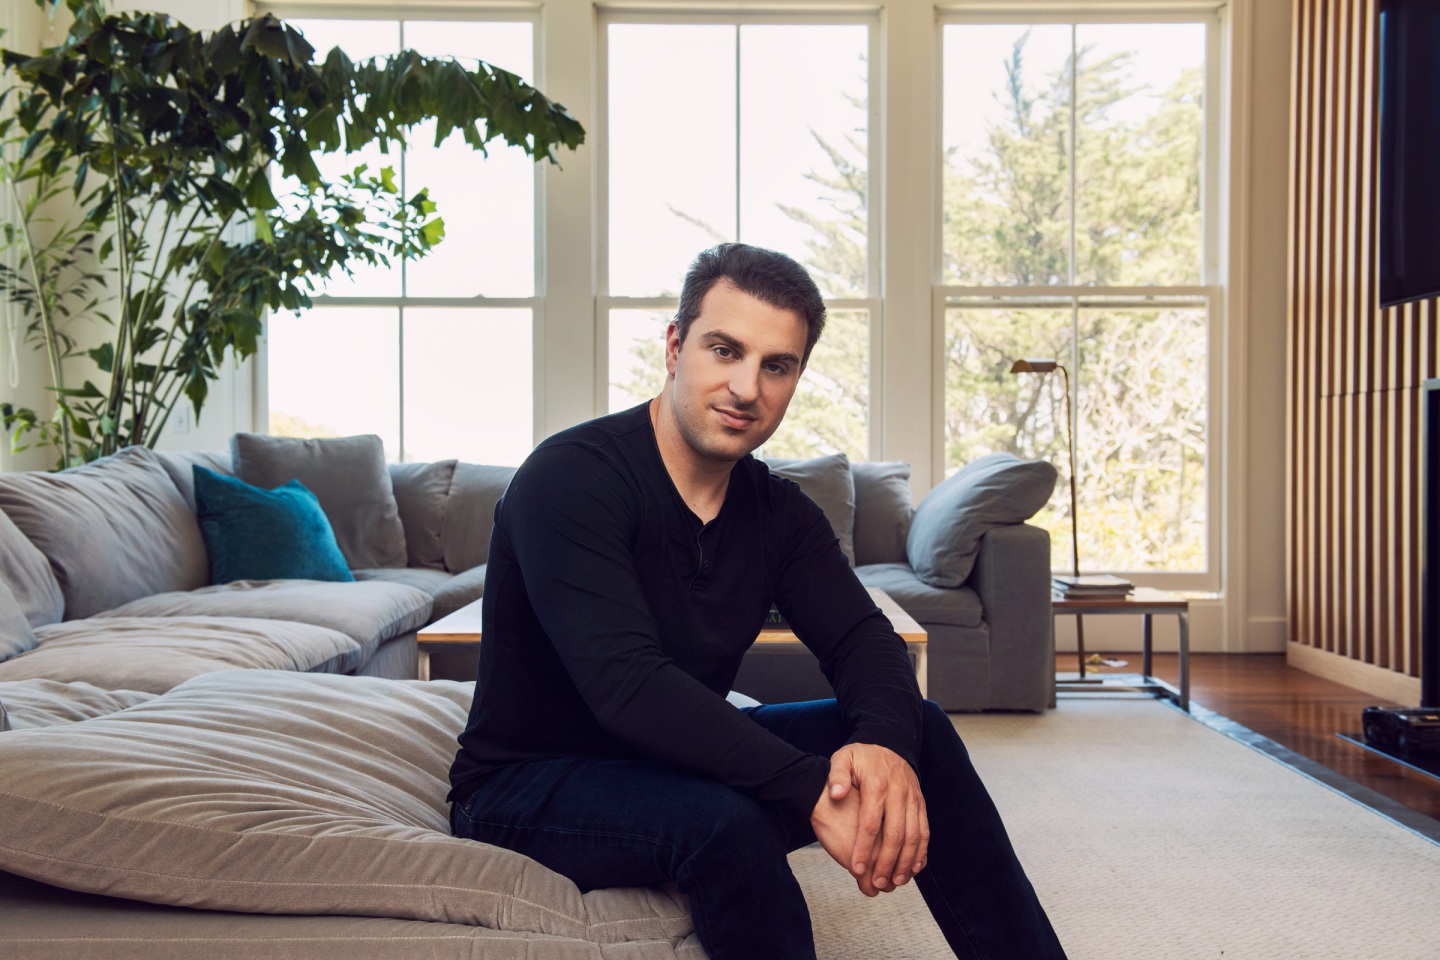 Airbnb CEO Brian Chesky poses inside a living room.